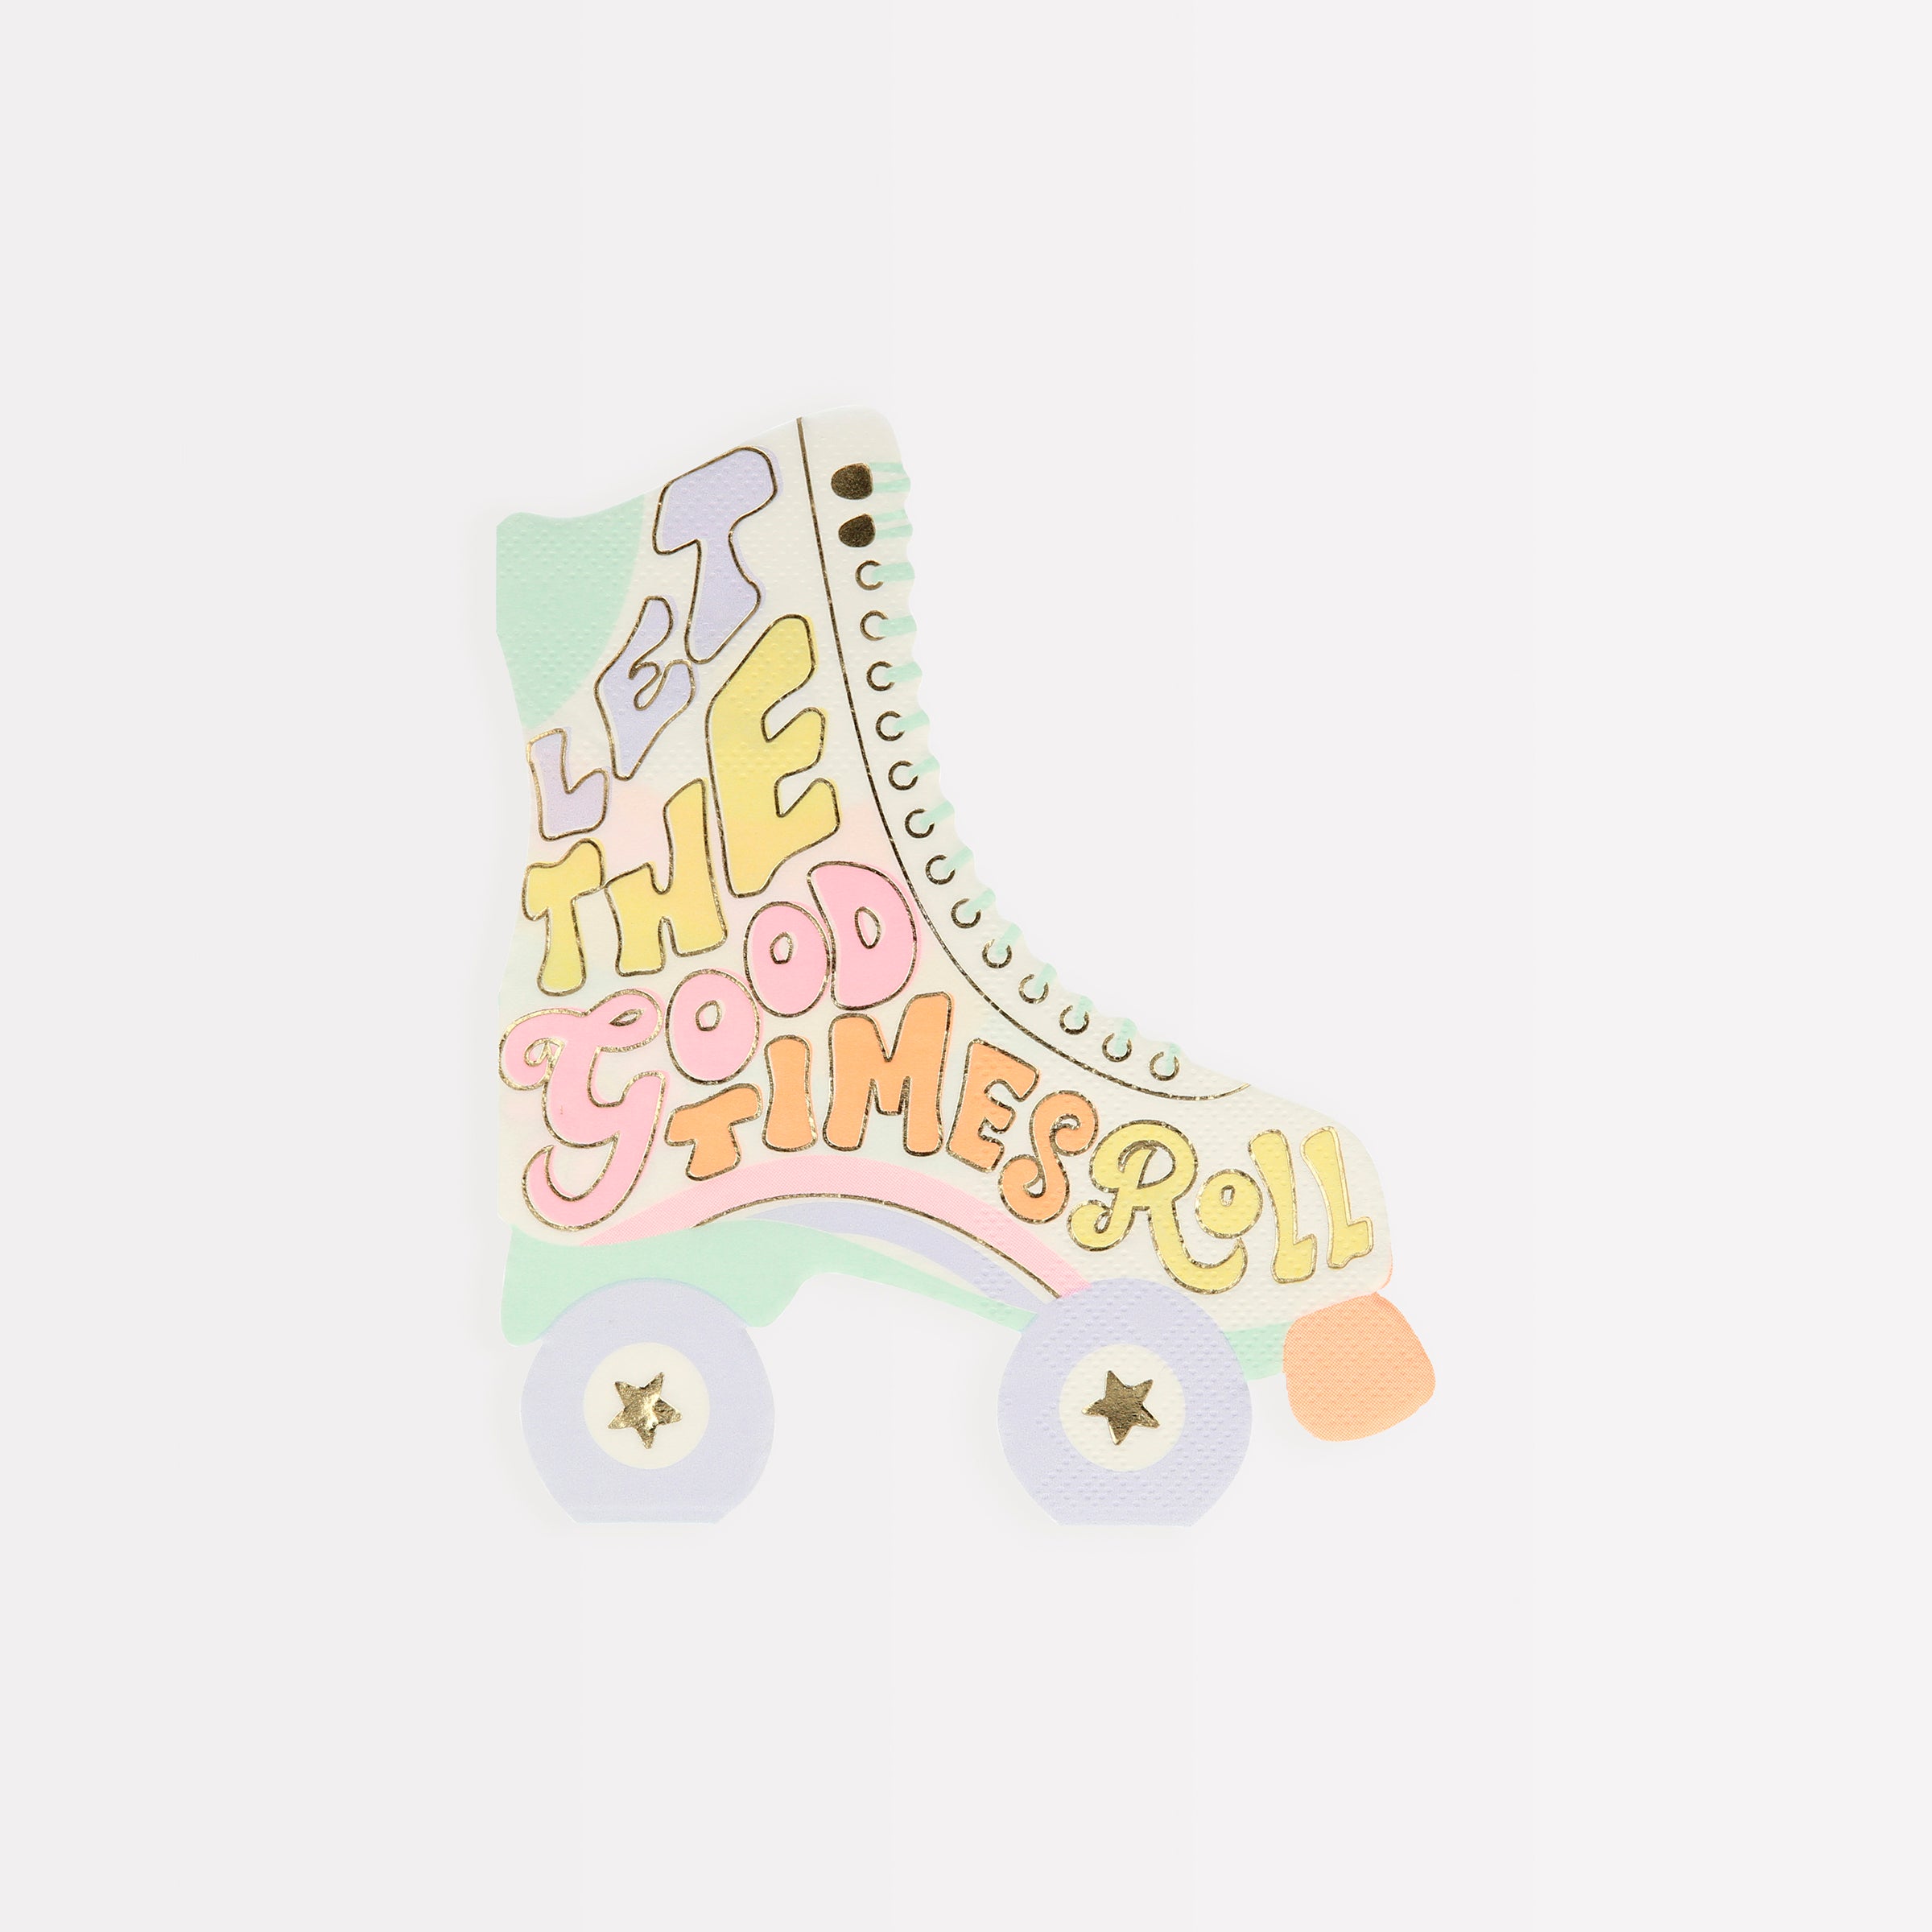 These roller skate shaped napkins add a groovy touch to any party.